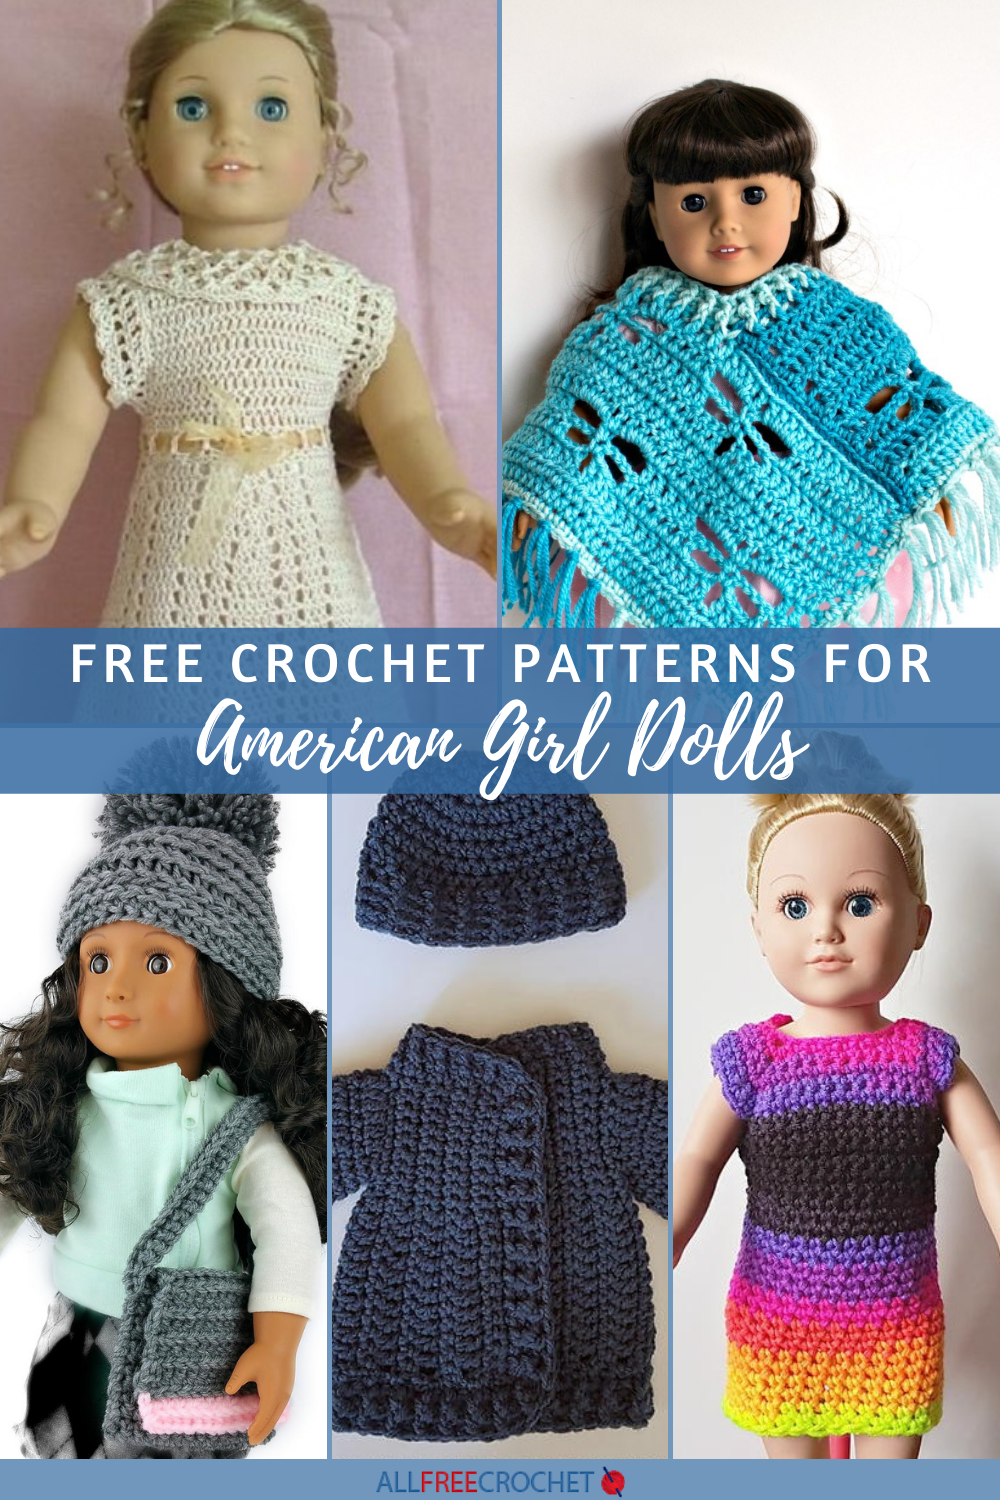 Crochet Doll Dress With Long Sleeves - Free Pattern & Video Tutorial